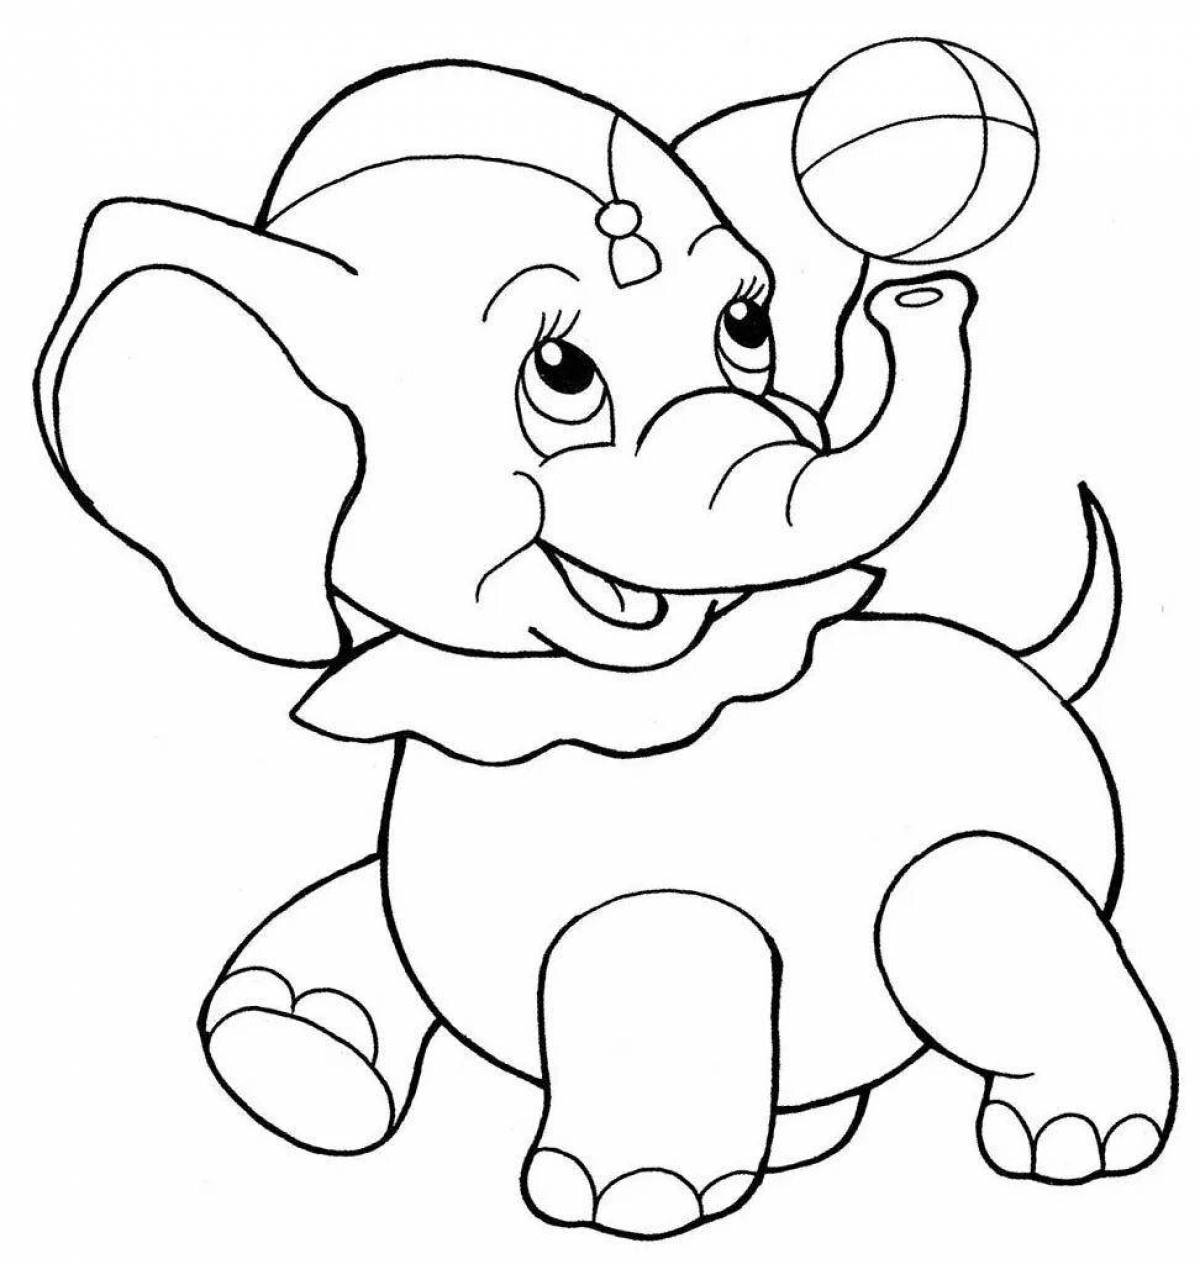 Beautiful elephant coloring page for kids